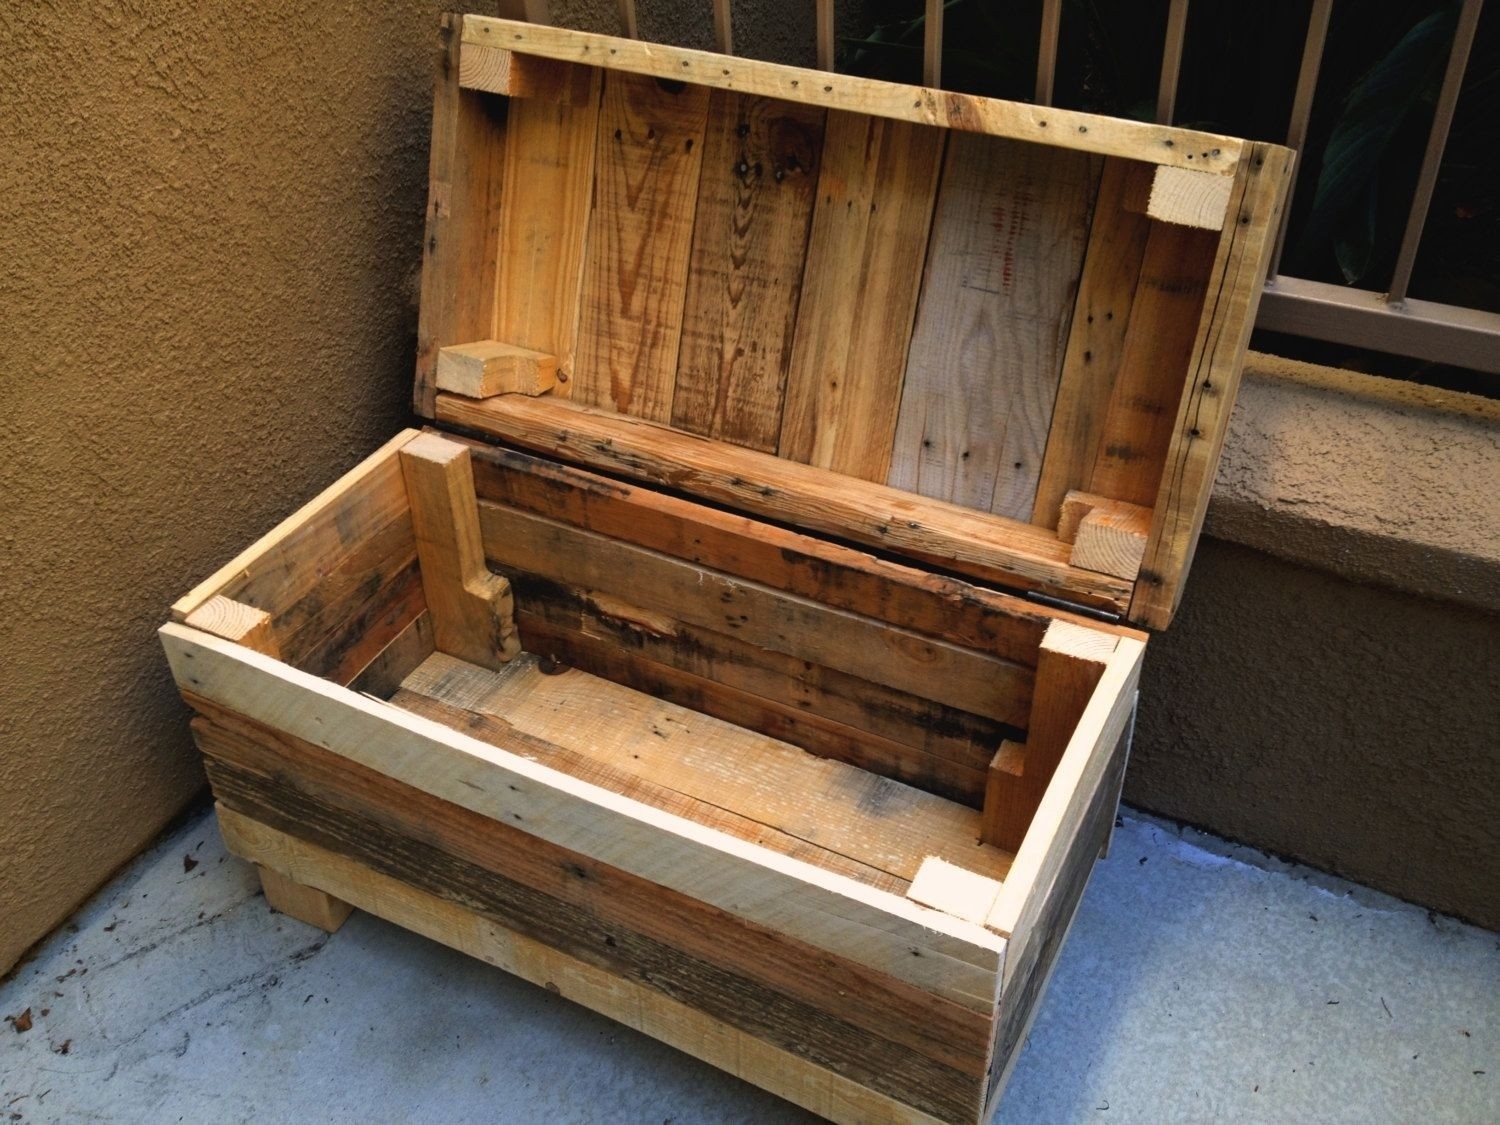 diy toy box with seat